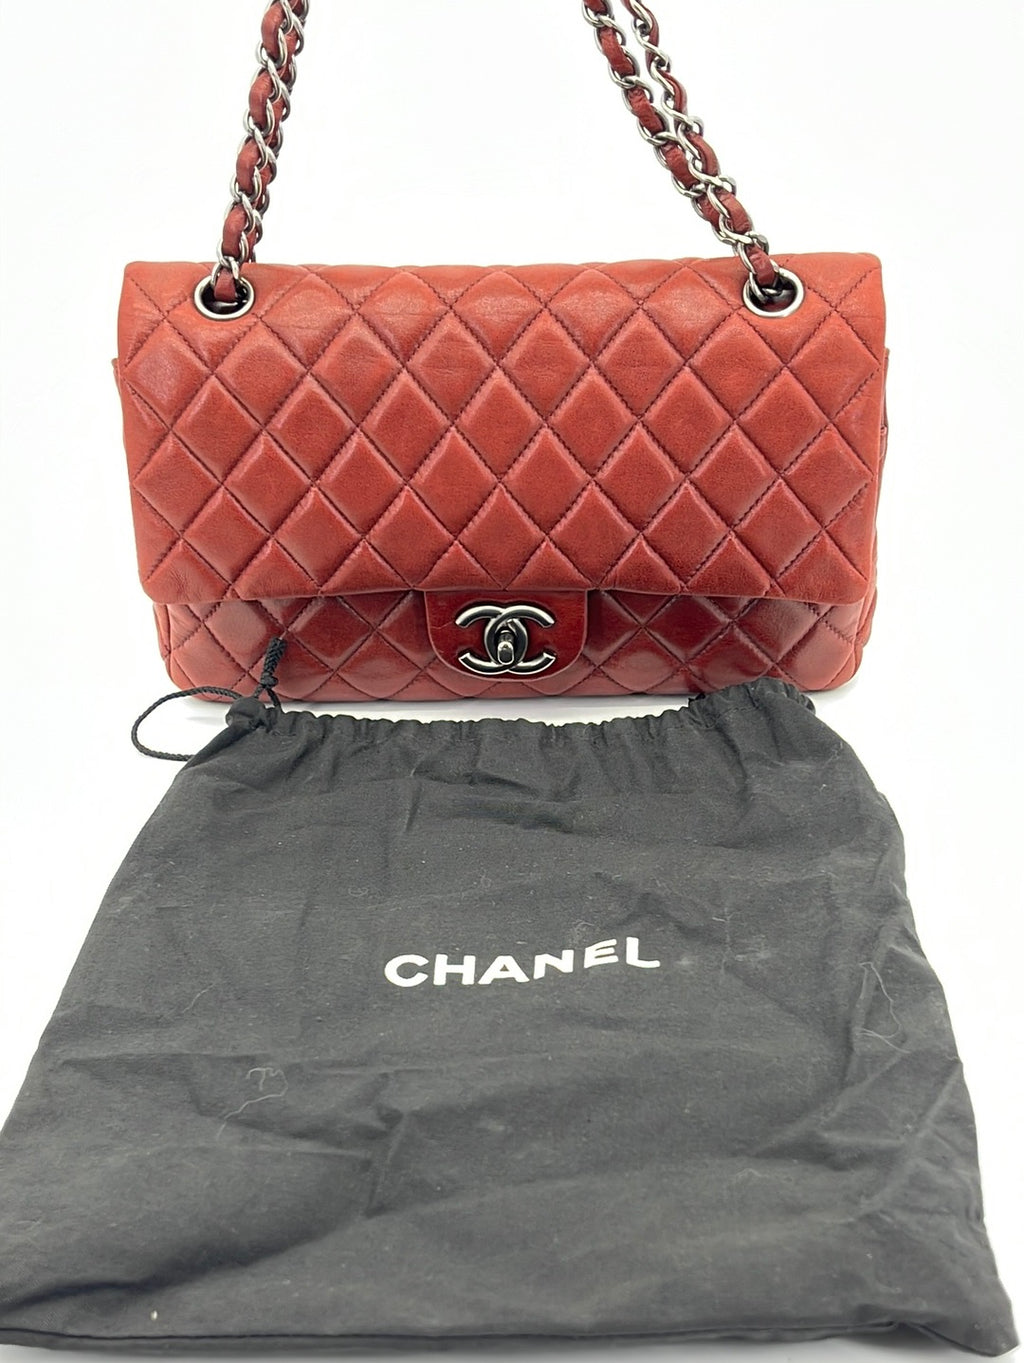 Preloved Chanel Classic Medium Burgundy Quilted Lambskin Double Flap Bag 12037622 100423